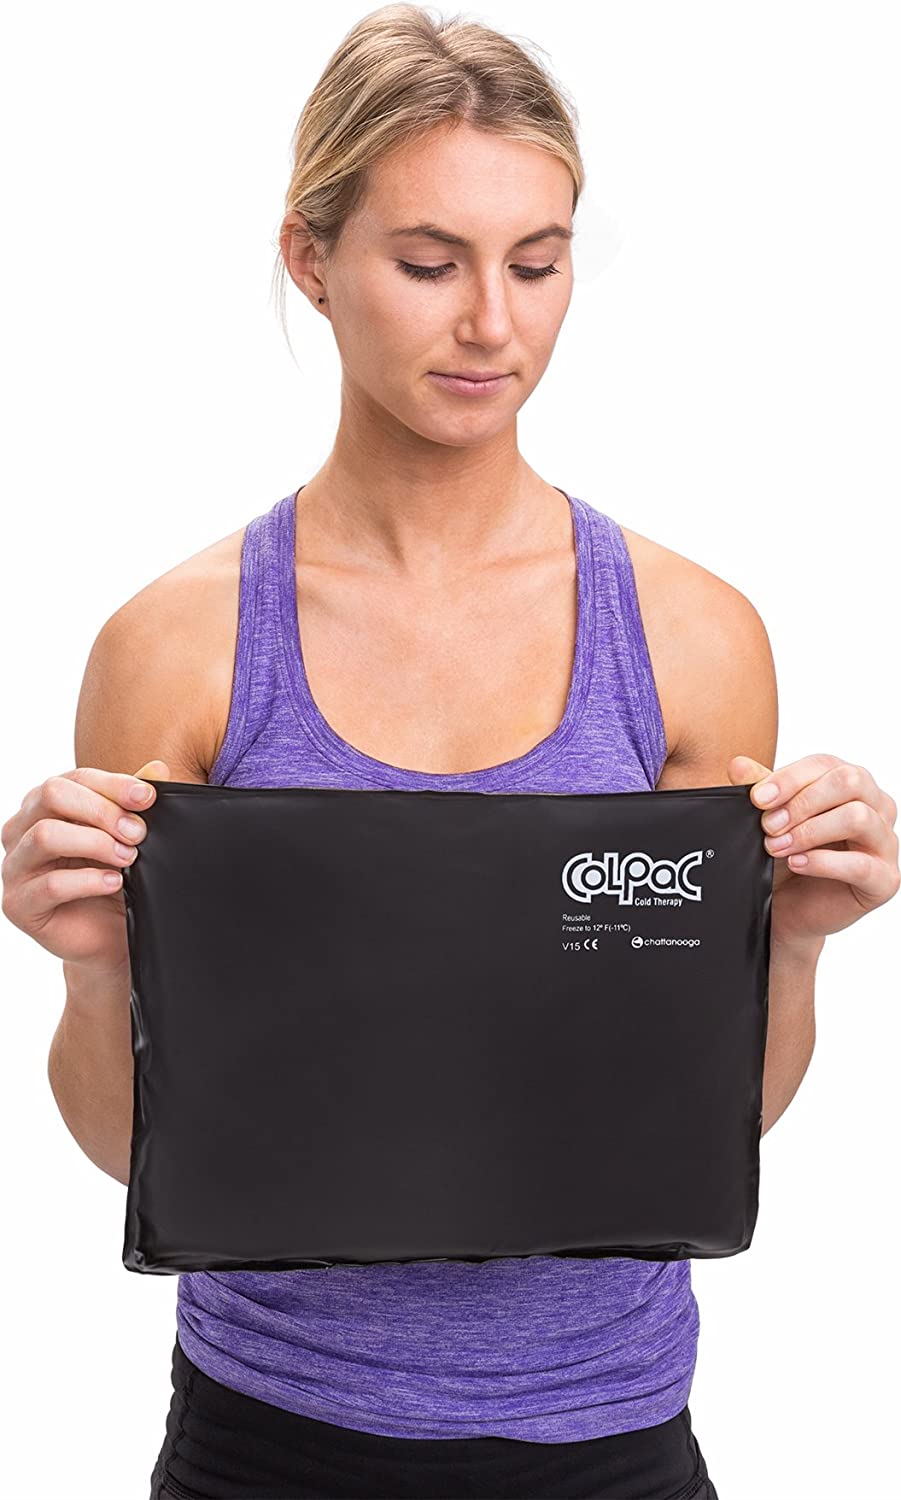 Chattanooga ColPac - Reusable Gel Ice Pack - Black Polyurethane - Standard - 10 in x 13.5 in - Cold Therapy - Knee, Arm, - image 5 of 5